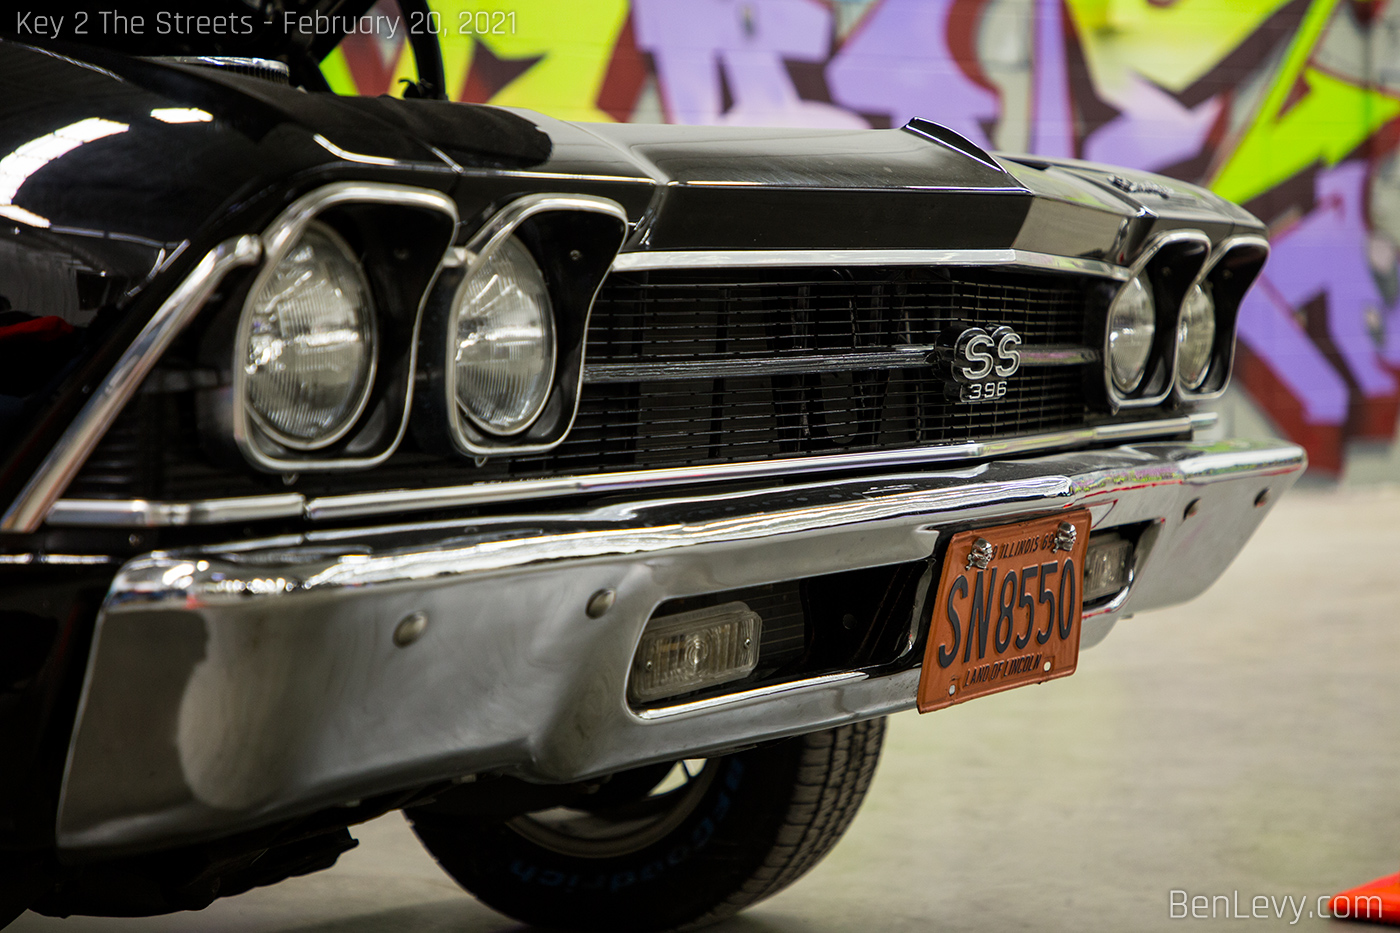 Front Grill of Black '69 Chevelle SS